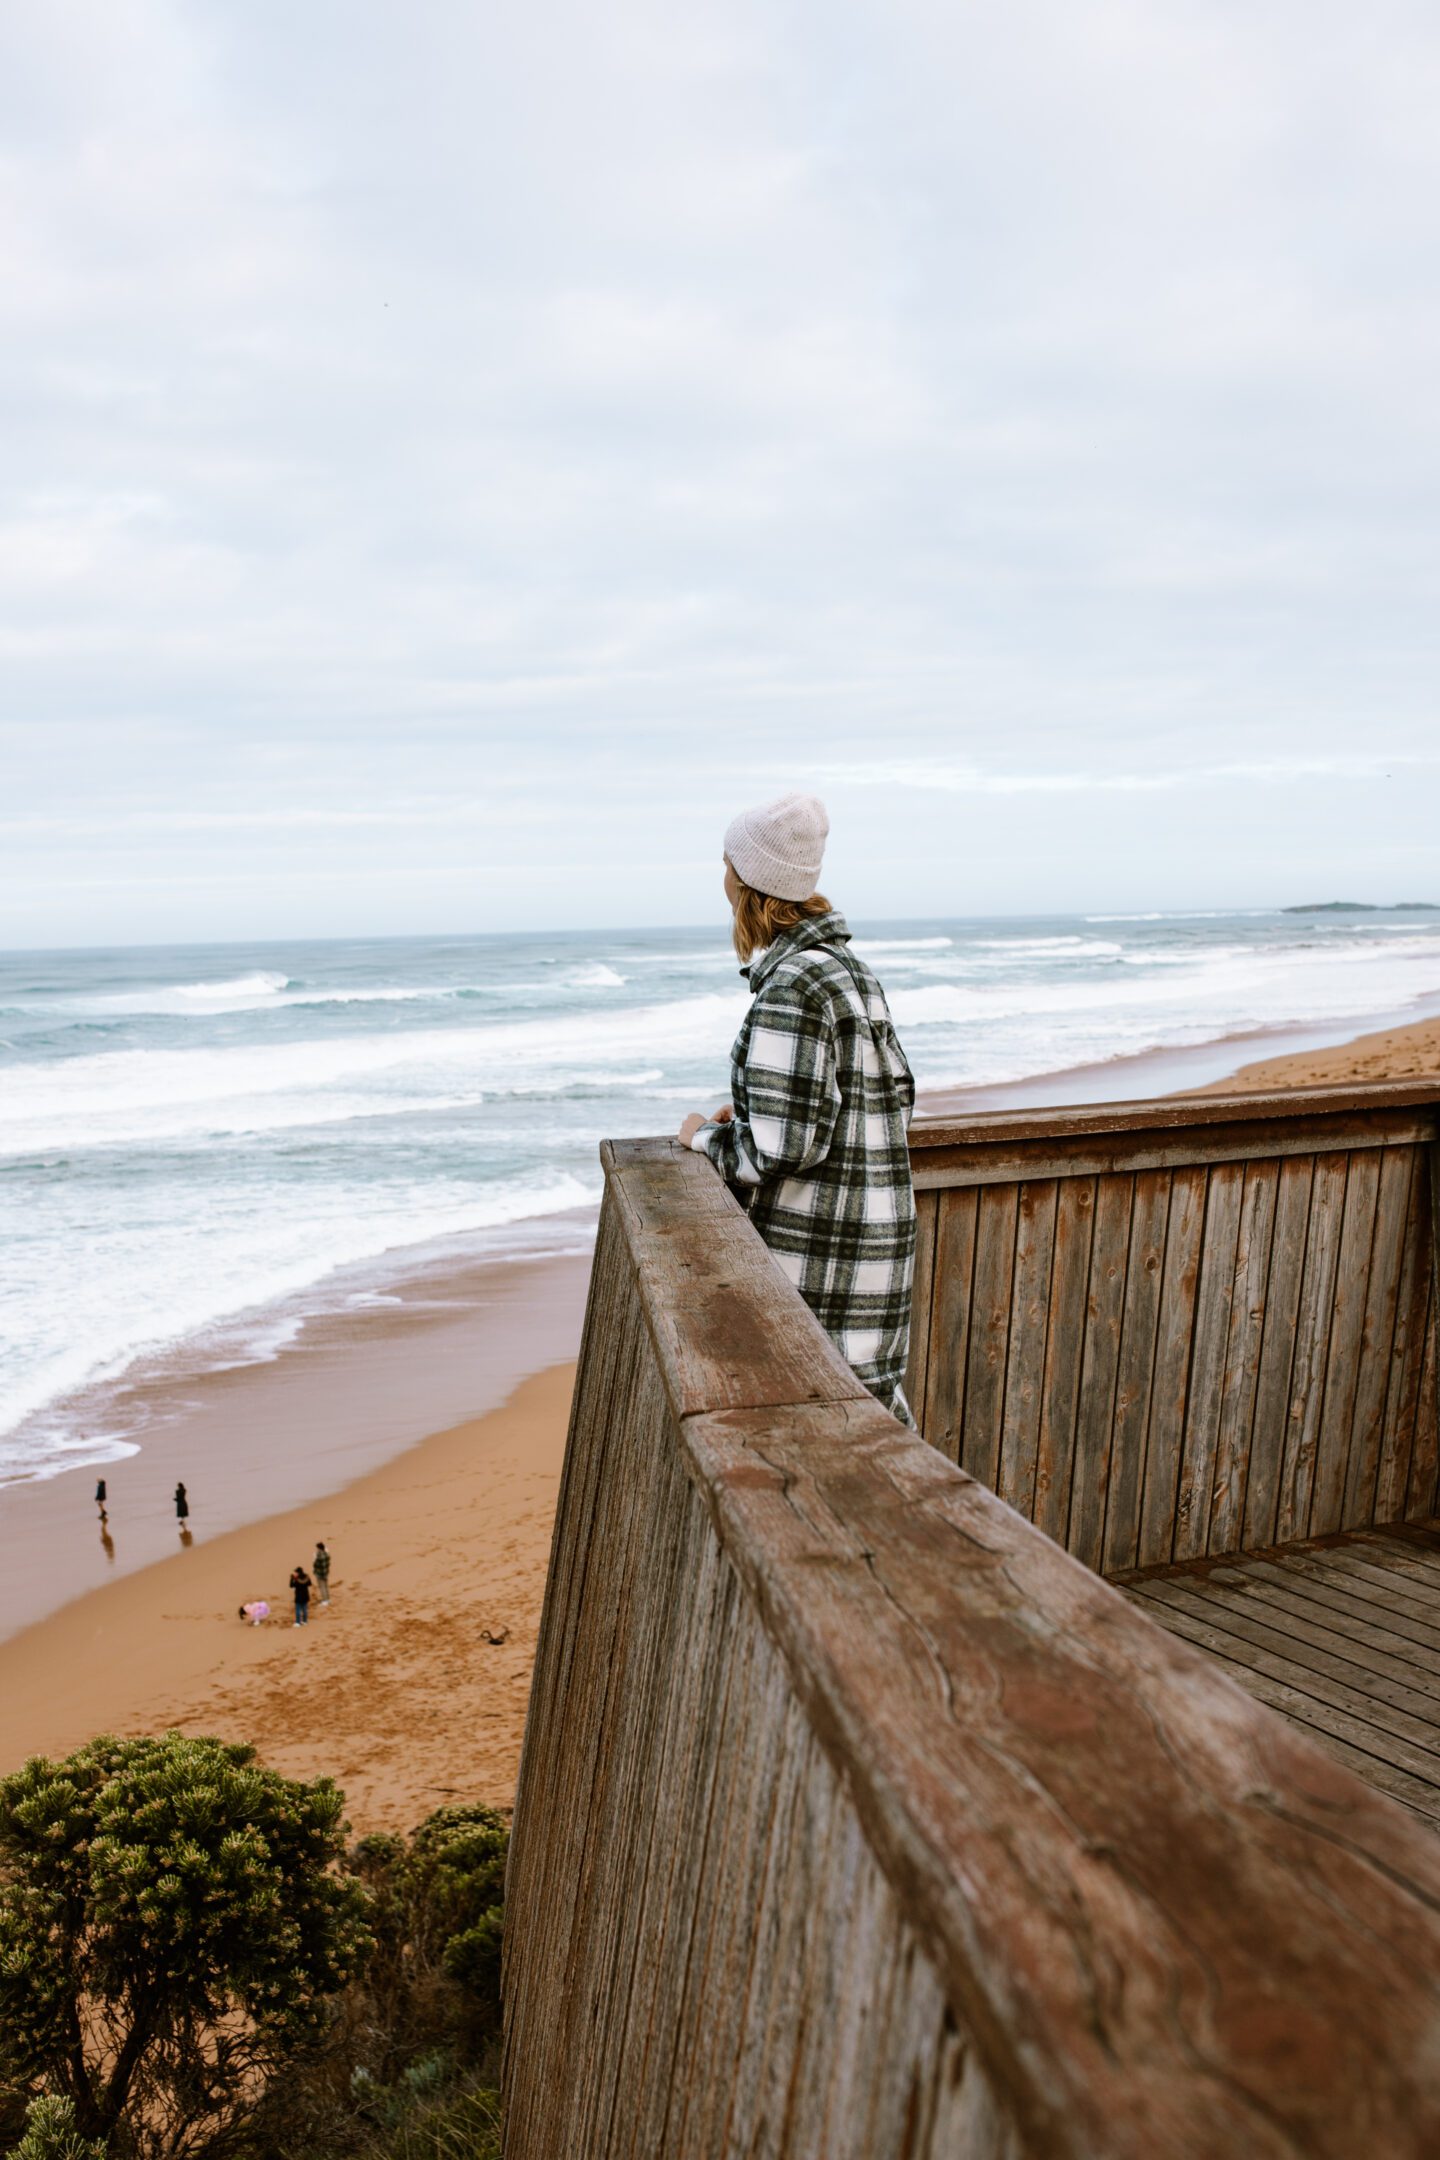 A girl looking out at the ocean from a wooden viewing platform, 